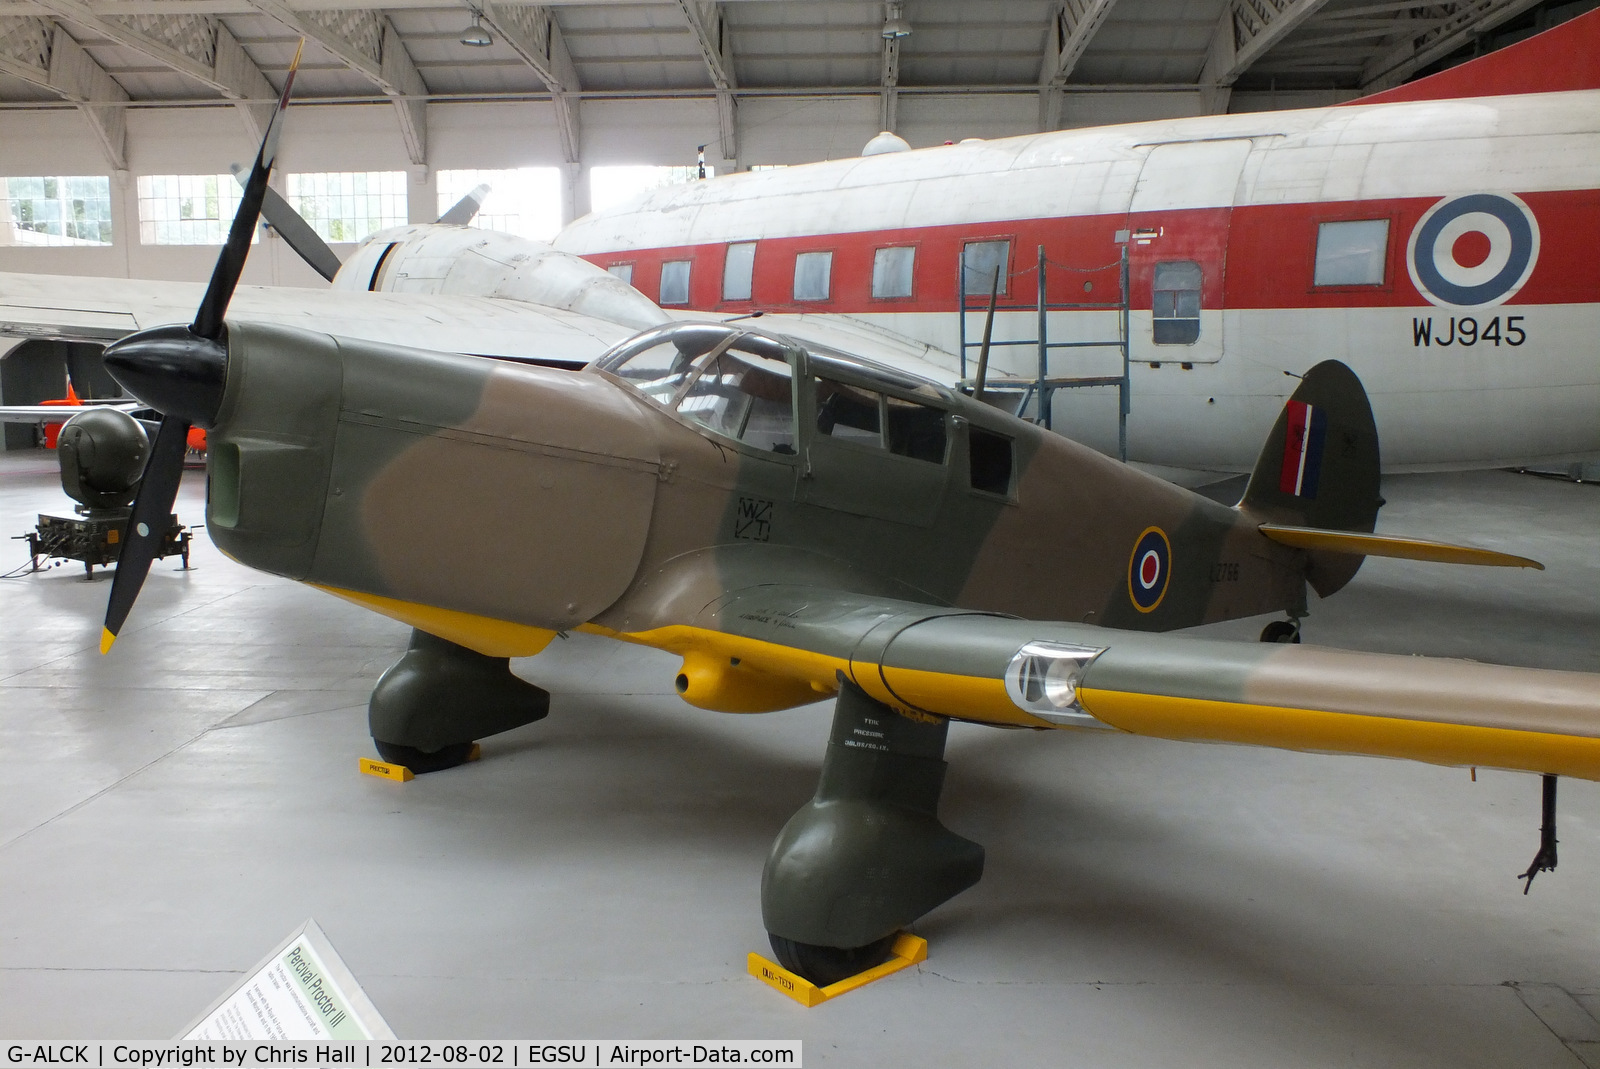 G-ALCK, F Hills And Sons Ltd Proctor 3 C/N H536, preserved at the IWM Duxford in RAF colours and wearing the serial LZ766